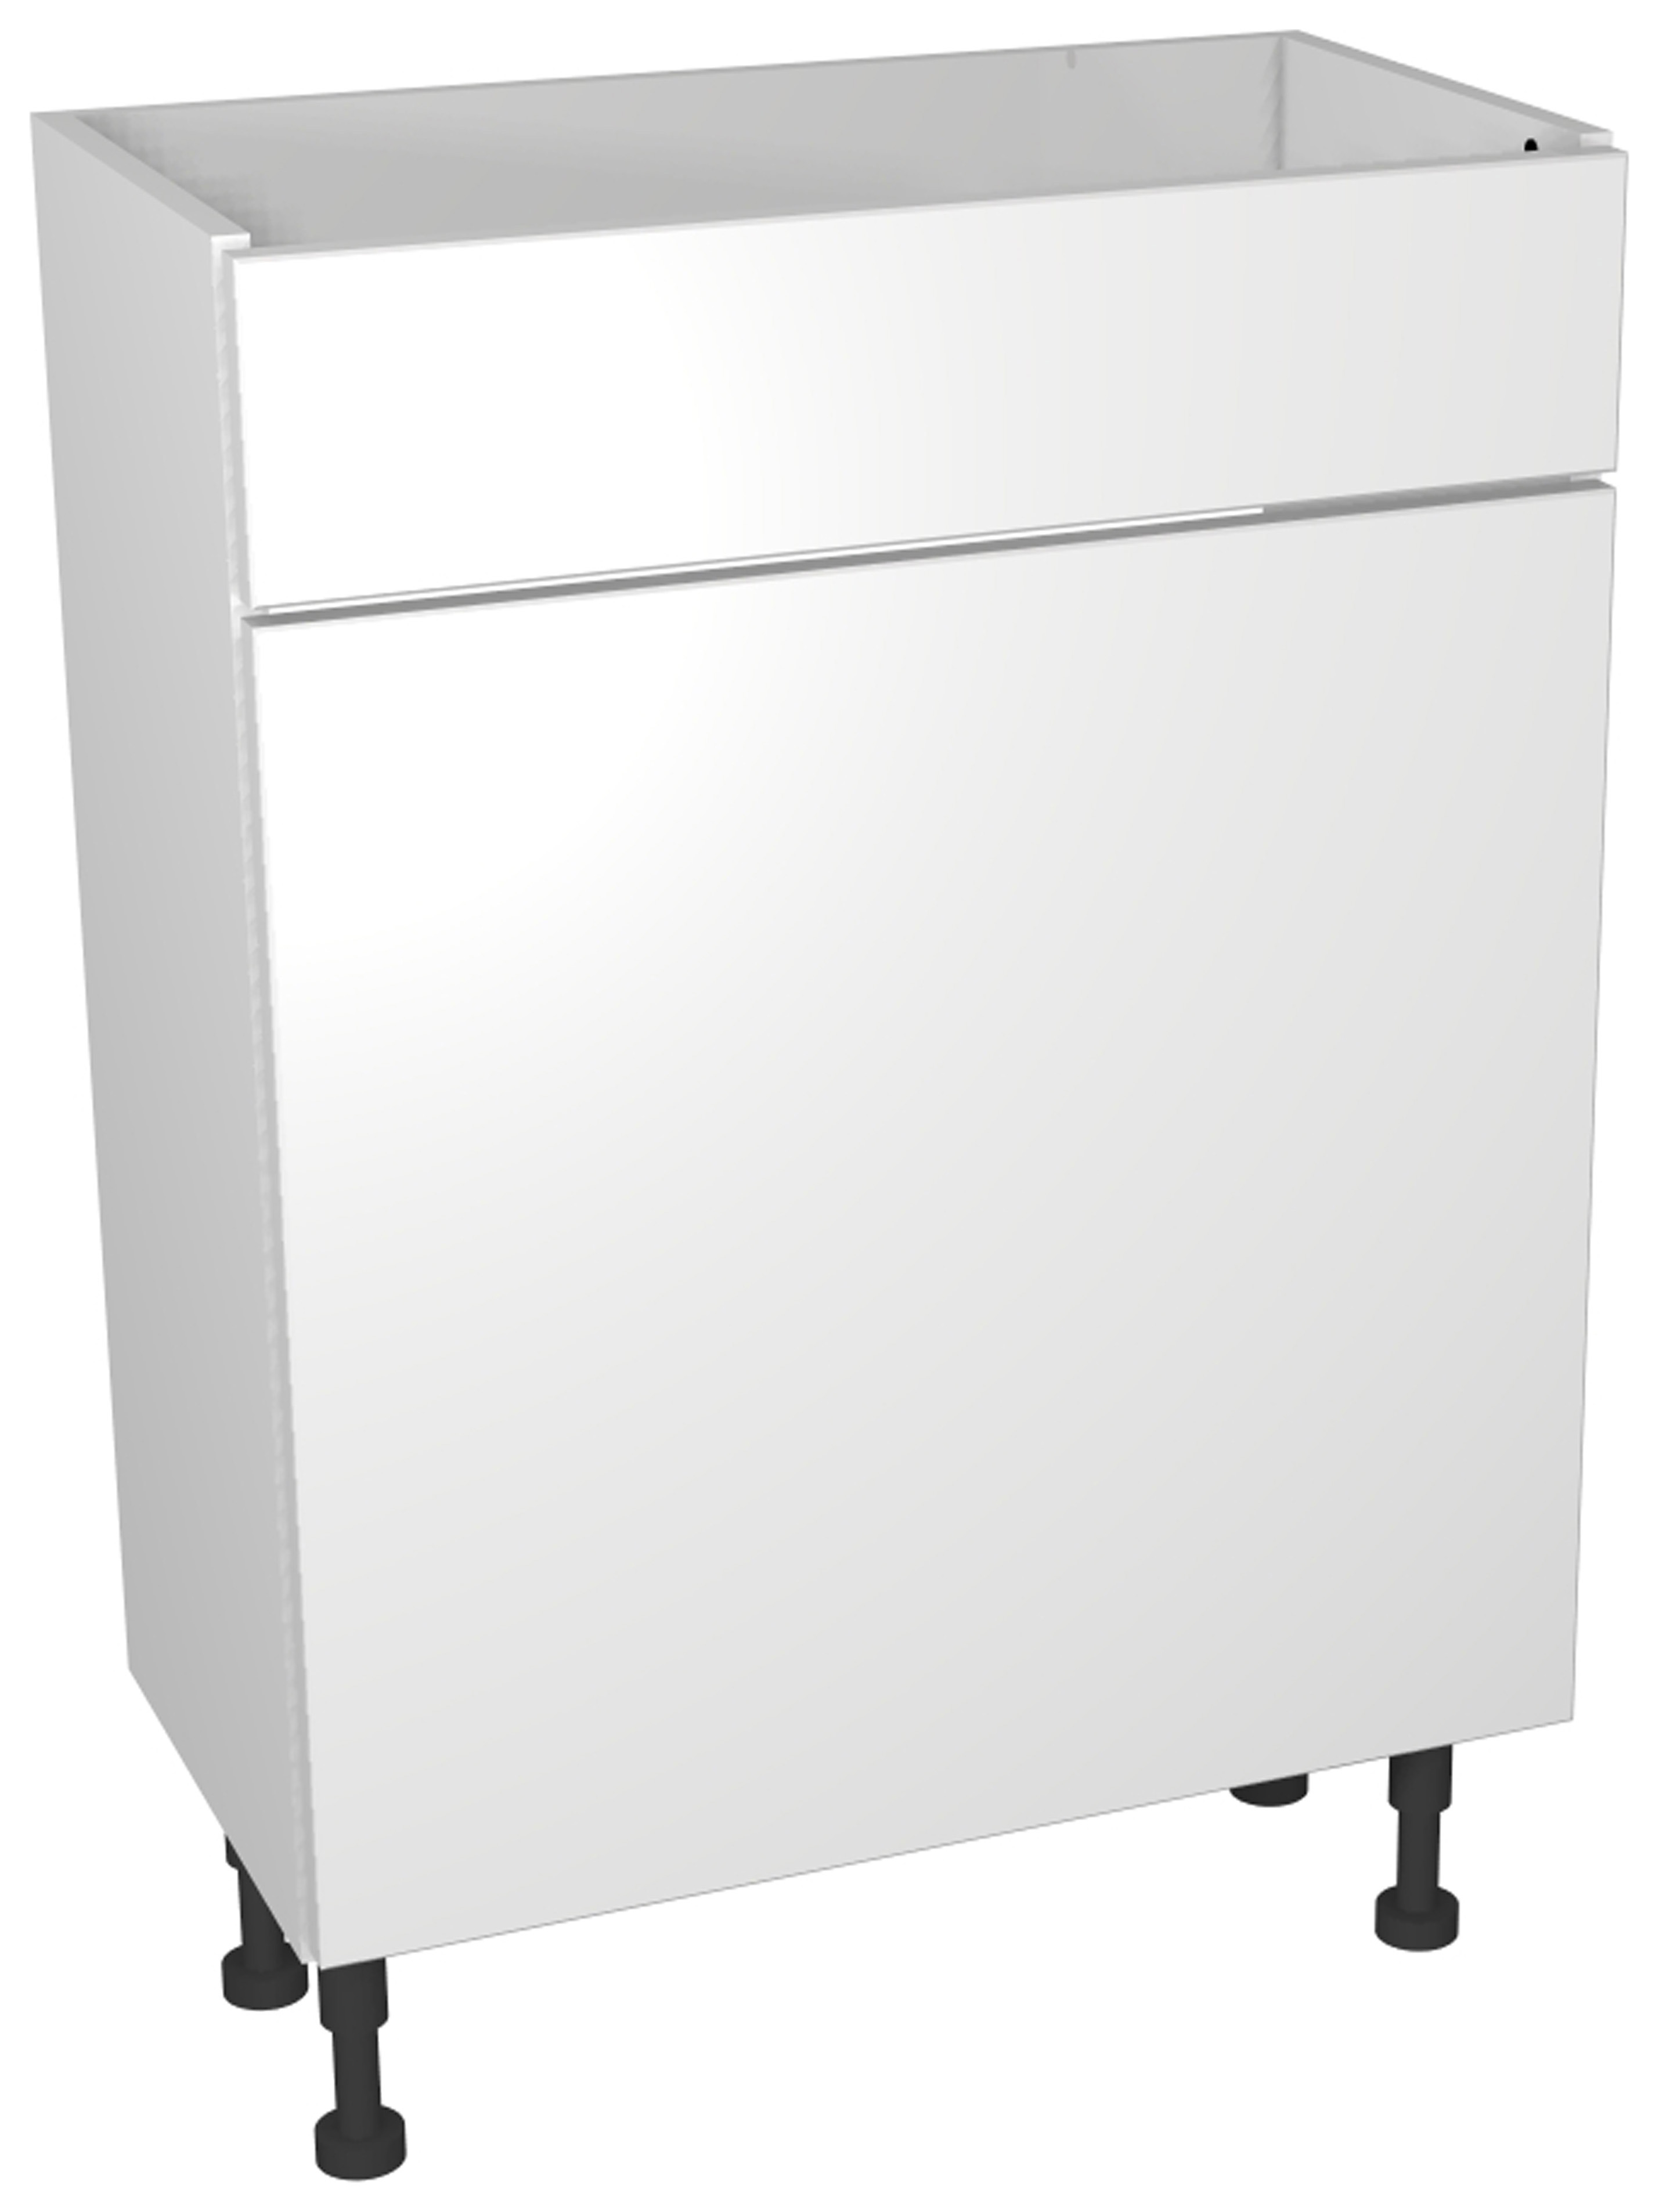 Image of Wickes Vienna Modern WC Unit, in White, Size: 600x735mm